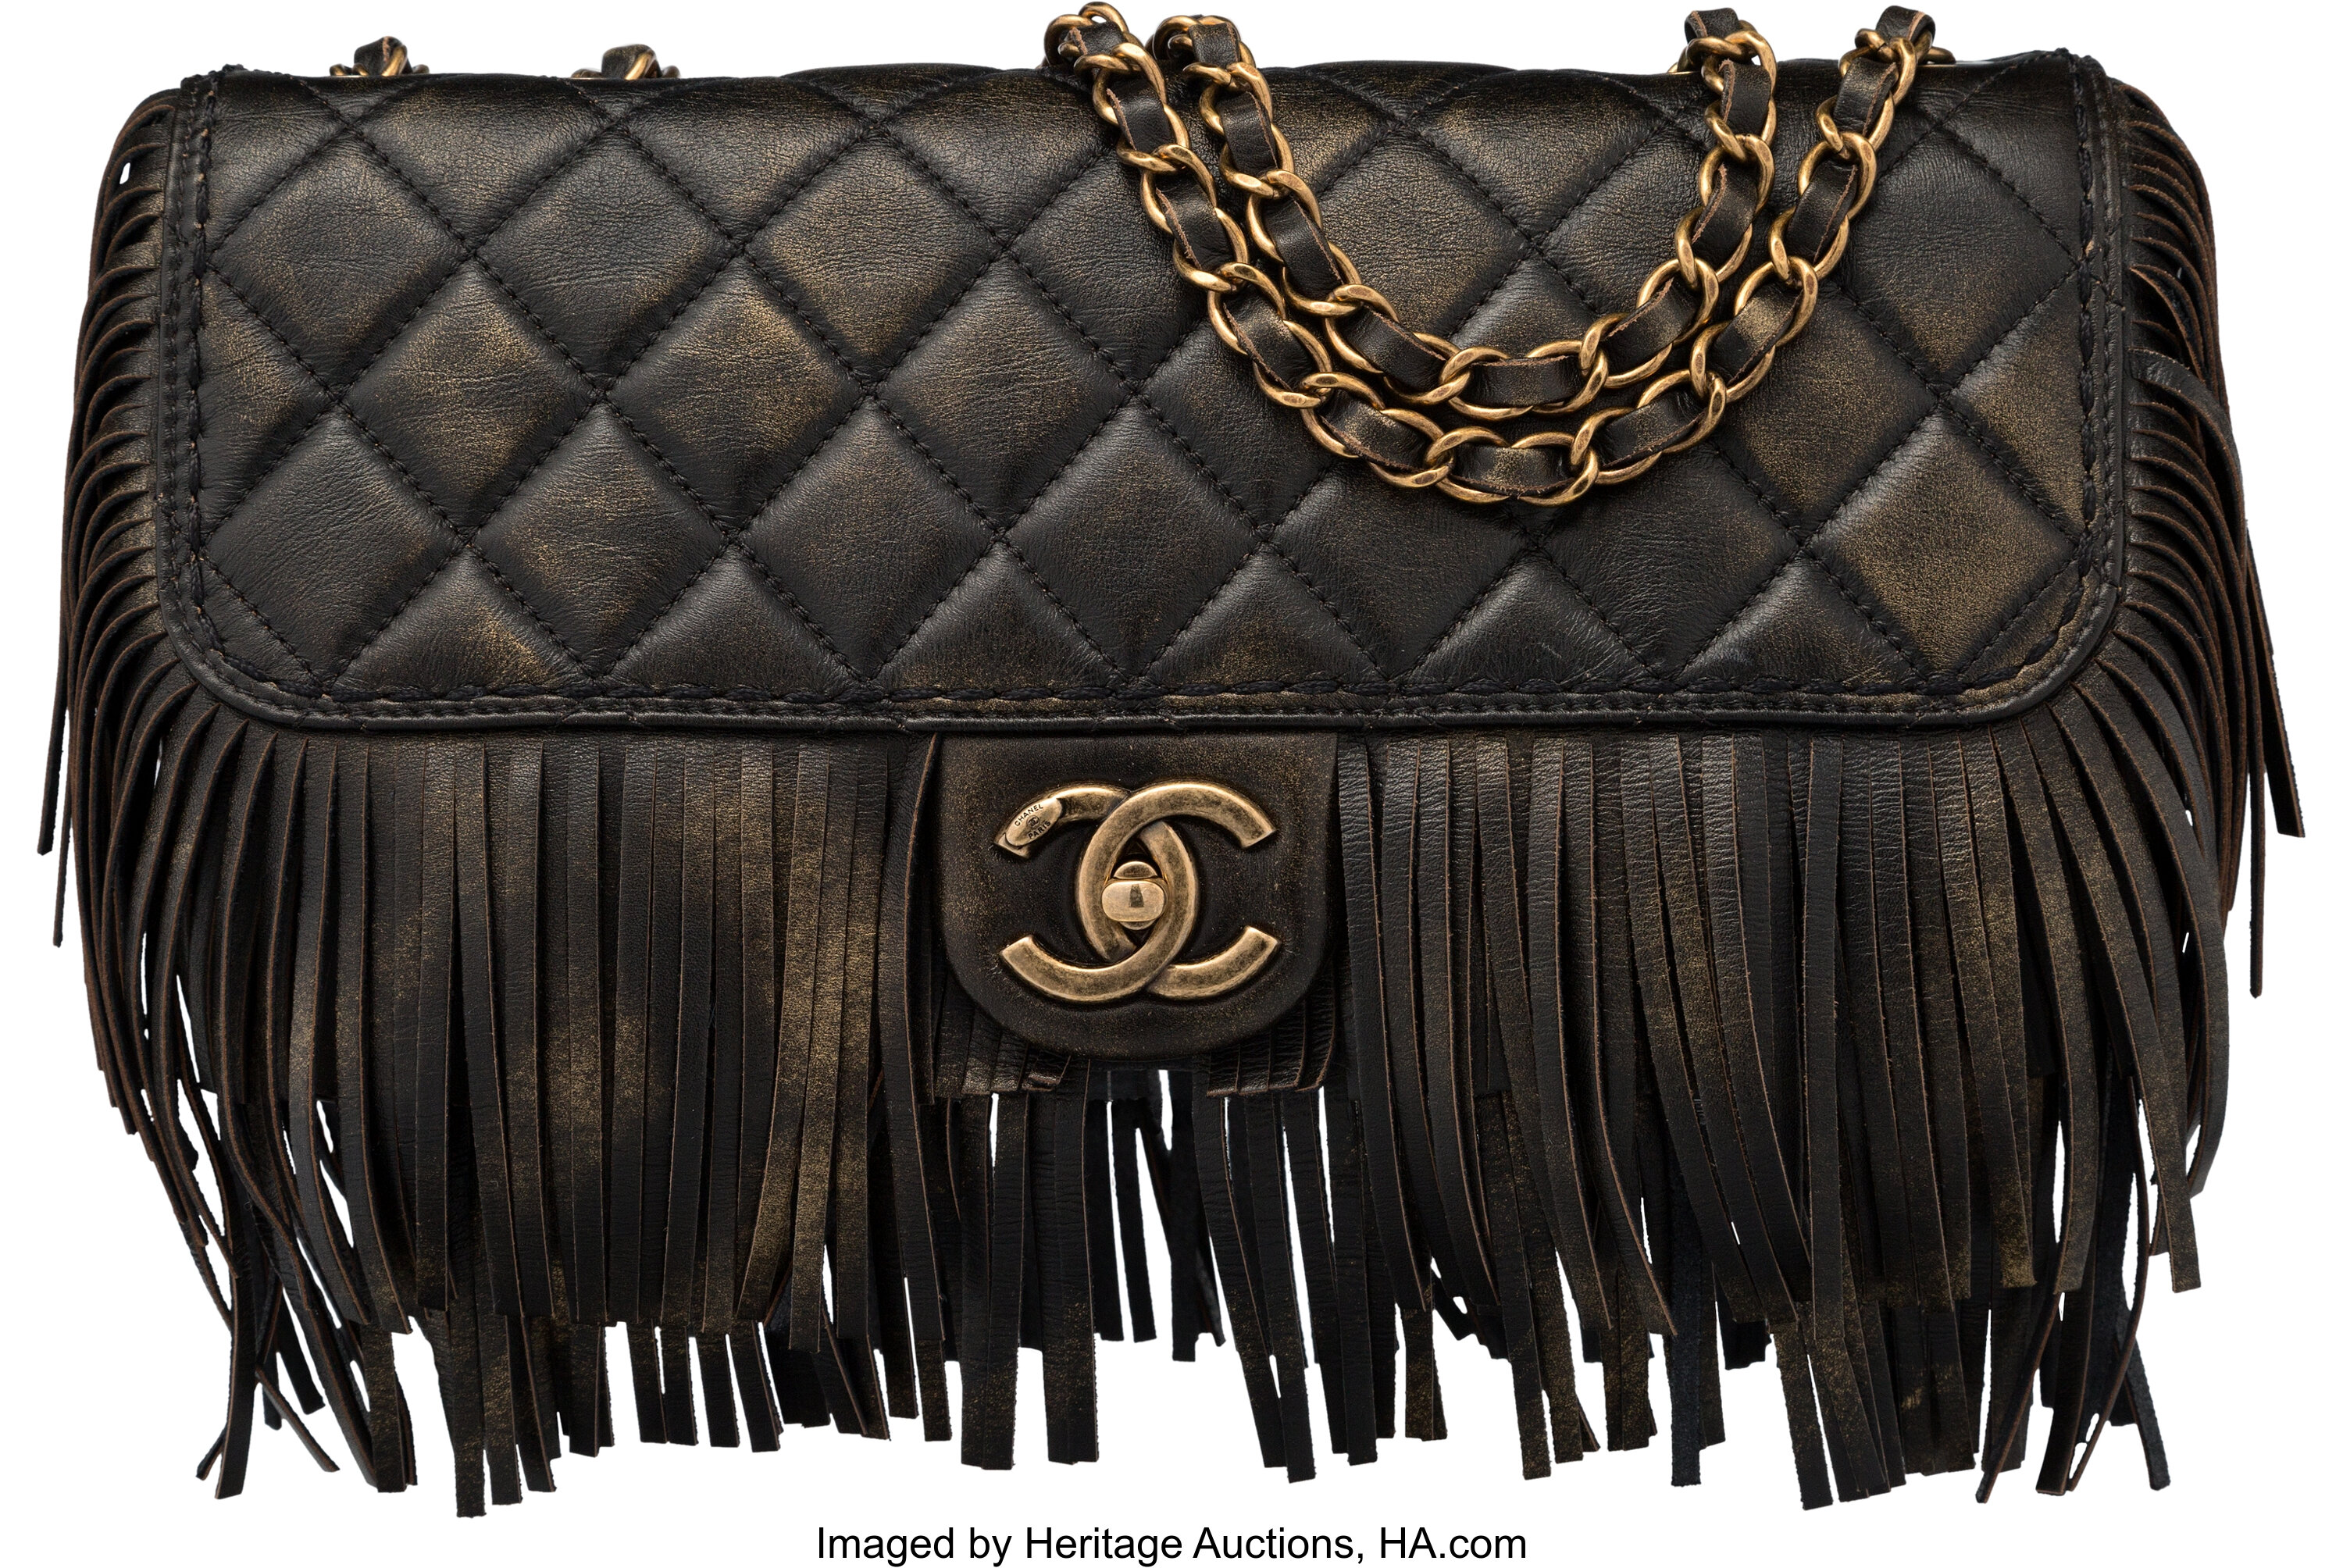 Chanel Limited Edition Paris-Dallas Black Quilted Leather Fringe